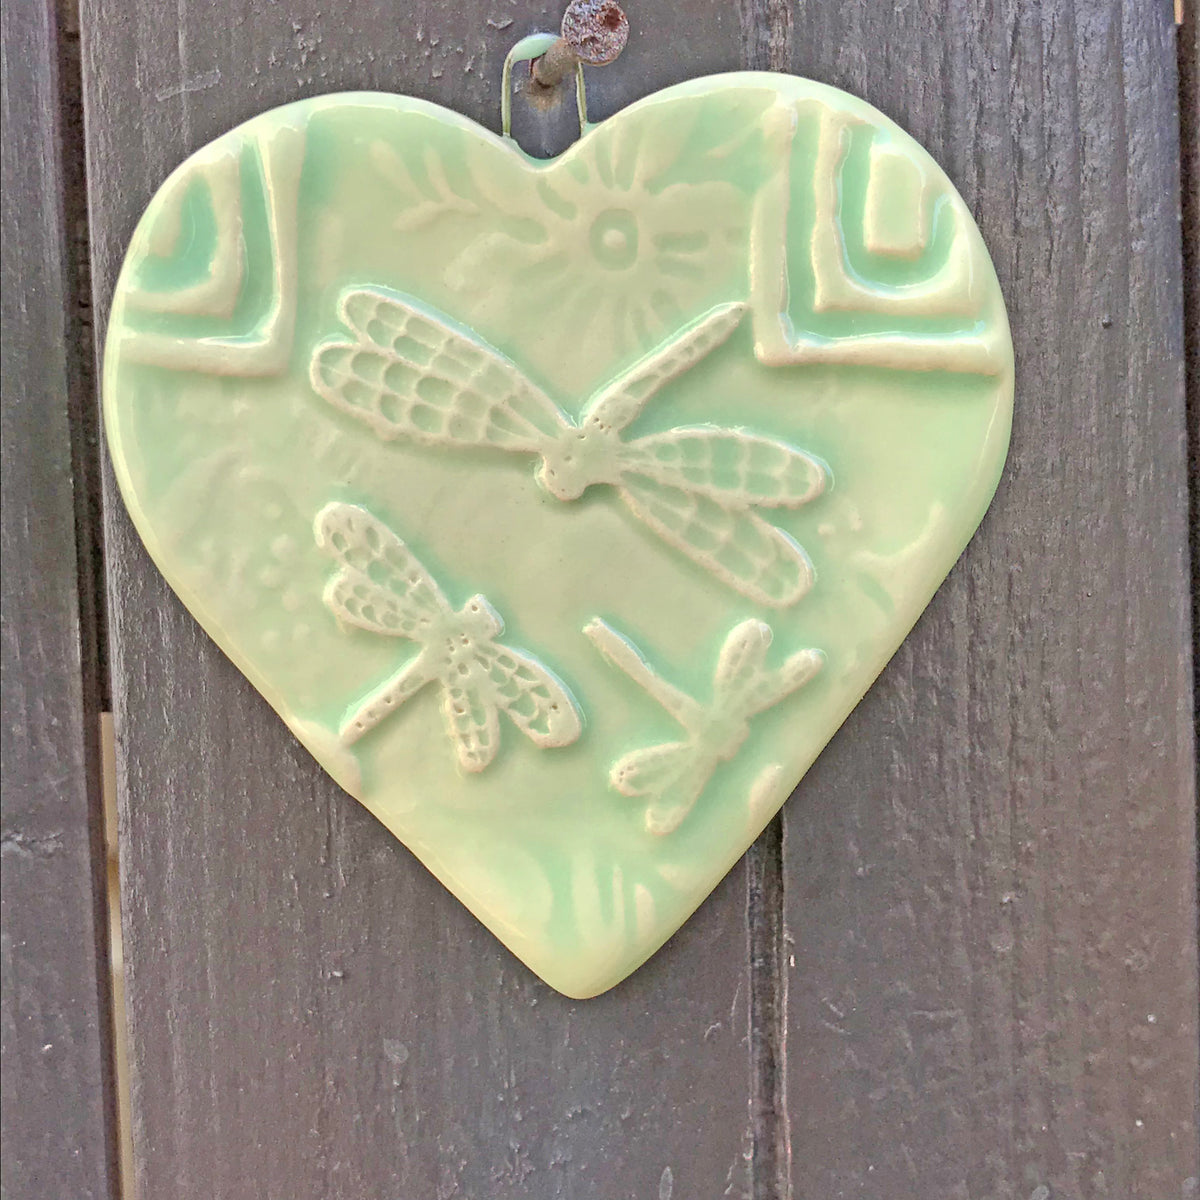 Handmade Ornament with 3 Dragonflies, glazed in a traditional celadon green.